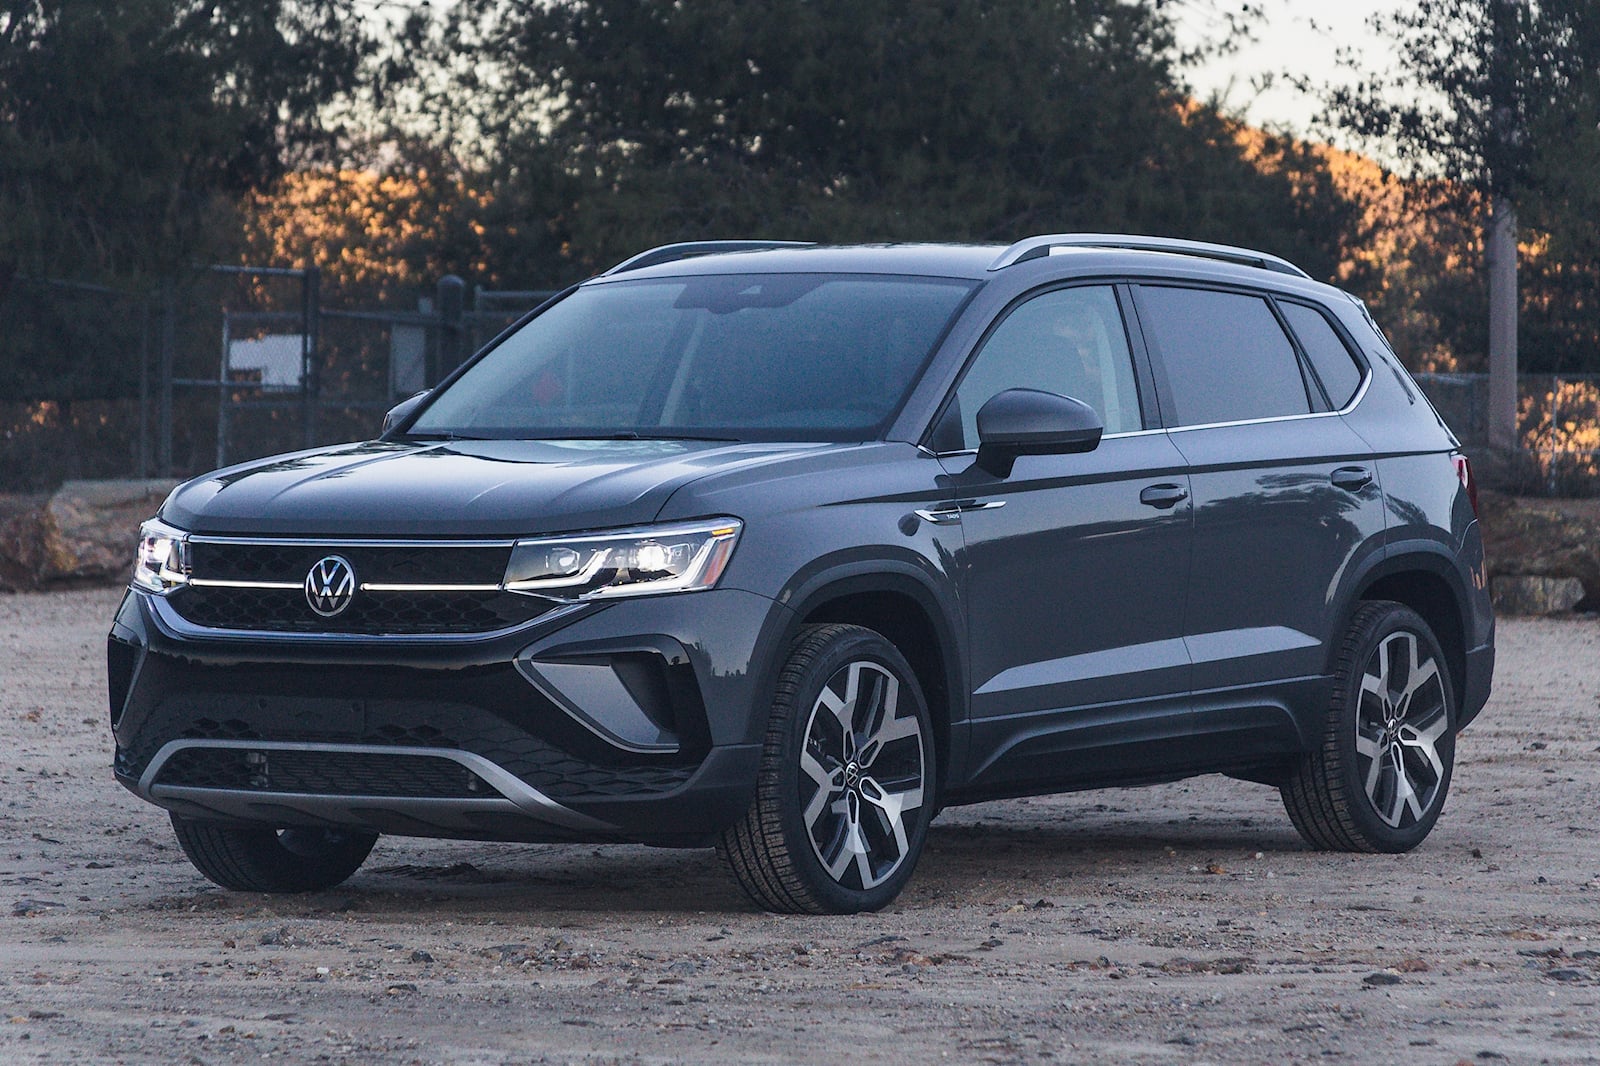 2023 Volkswagen Taos Safety & Reliability Ratings: Warranty, Crash Test